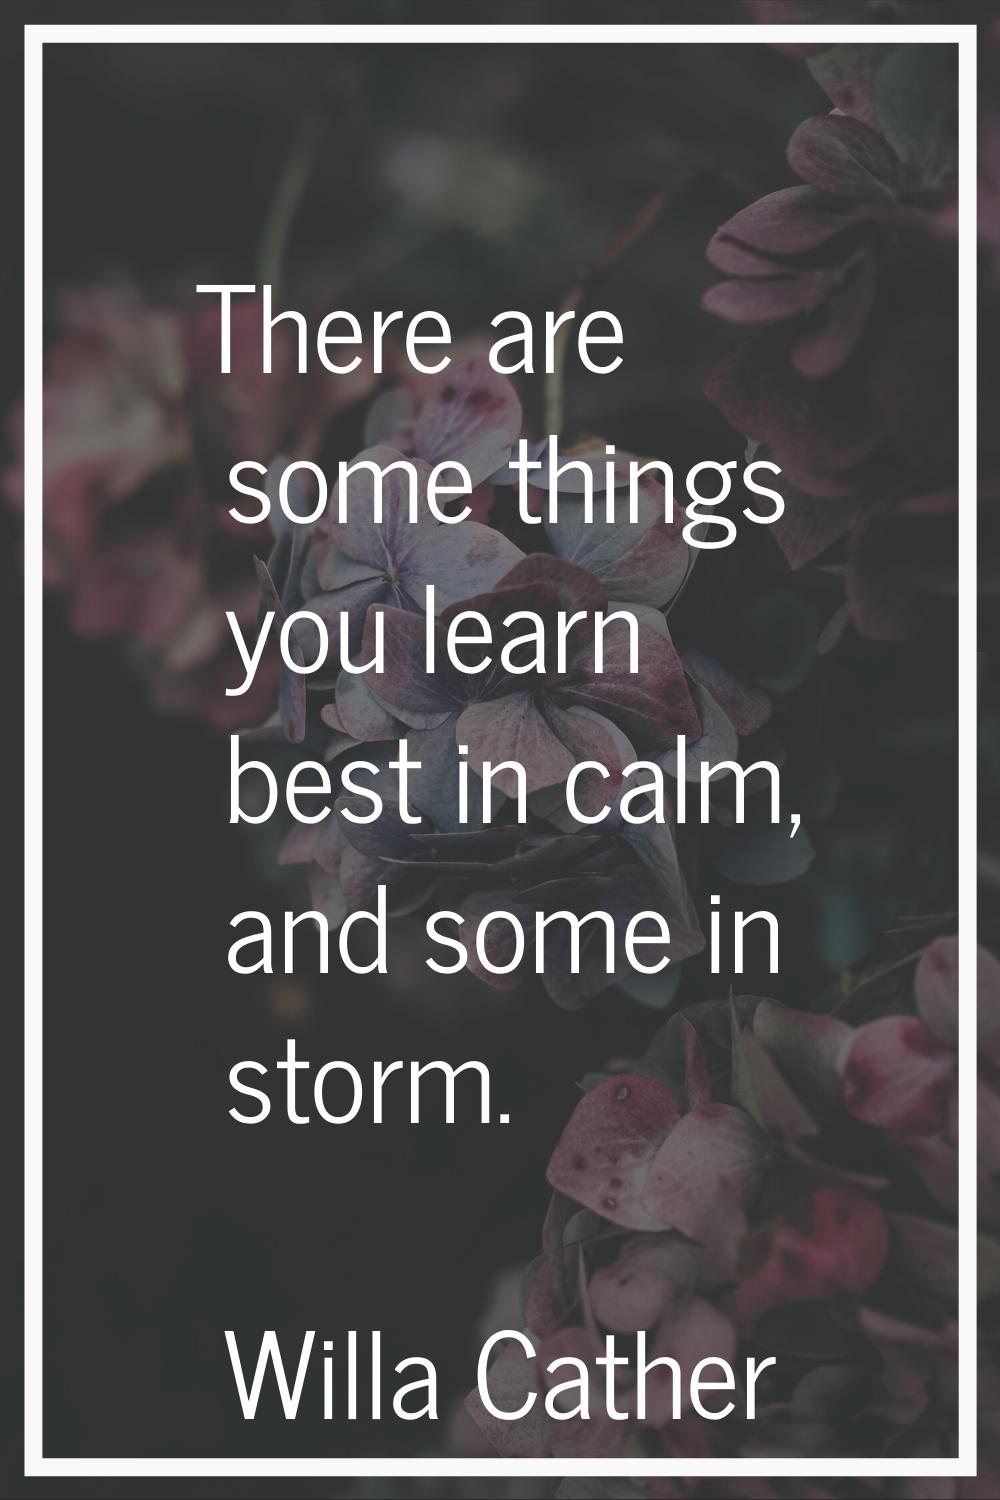 There are some things you learn best in calm, and some in storm.